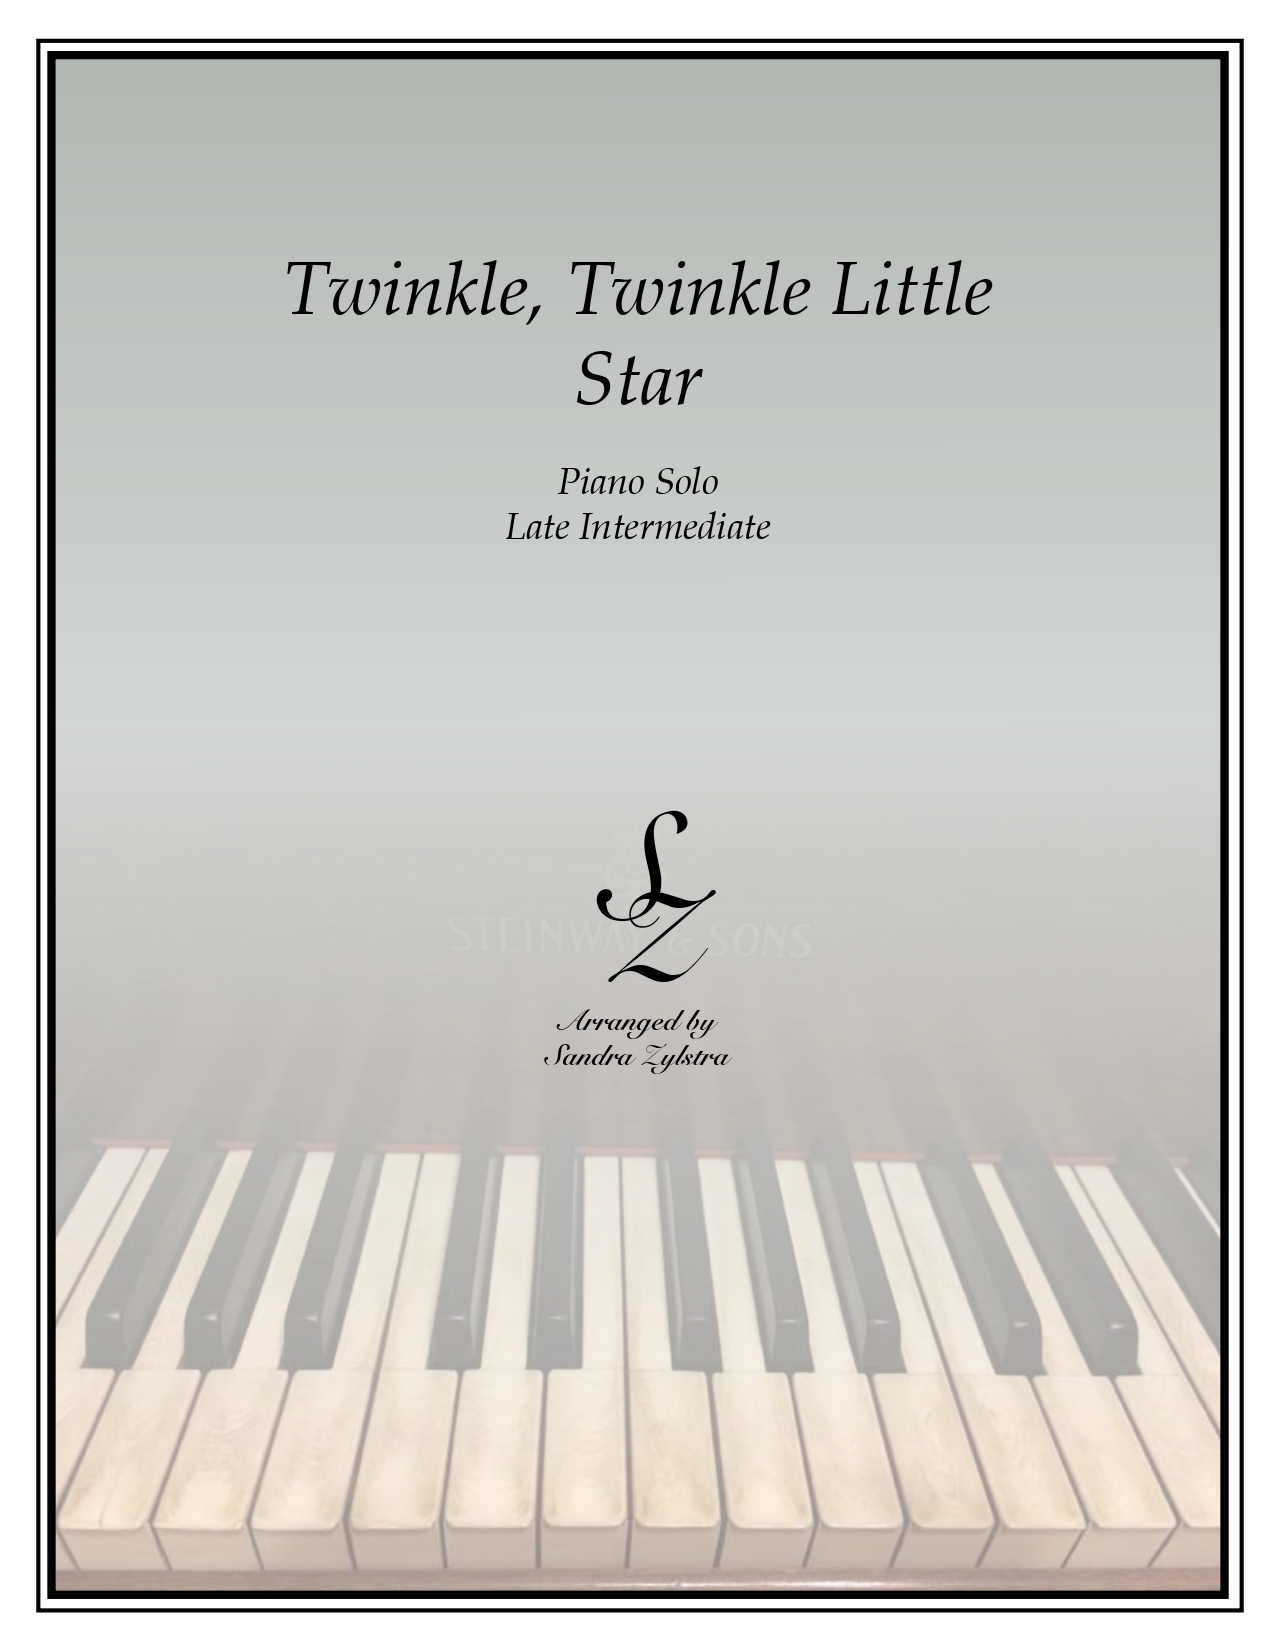 Twinkle Twinkle Little Star late intermediate piano cover page 00011